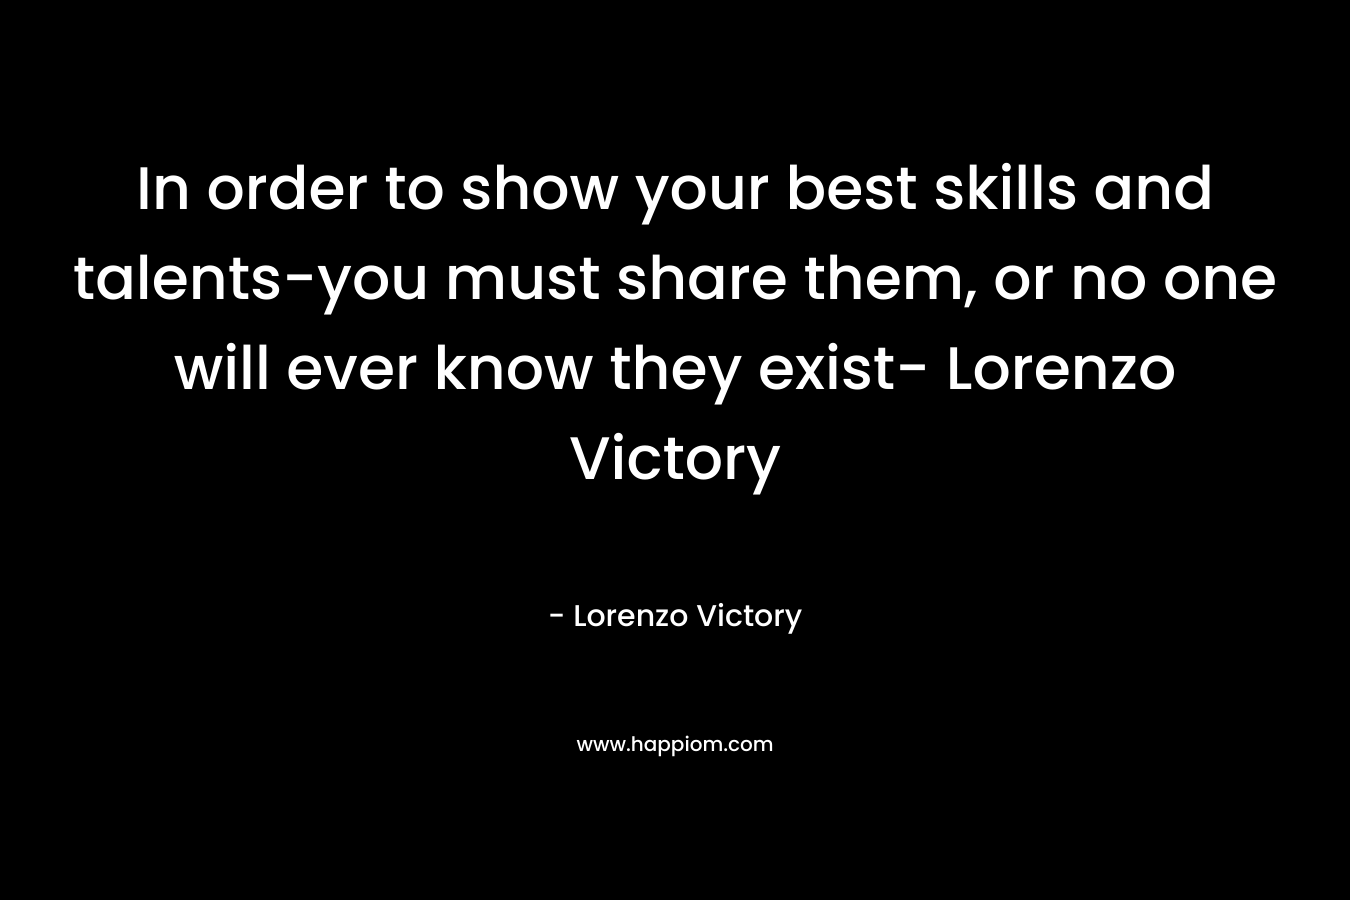 In order to show your best skills and talents-you must share them, or no one will ever know they exist- Lorenzo Victory